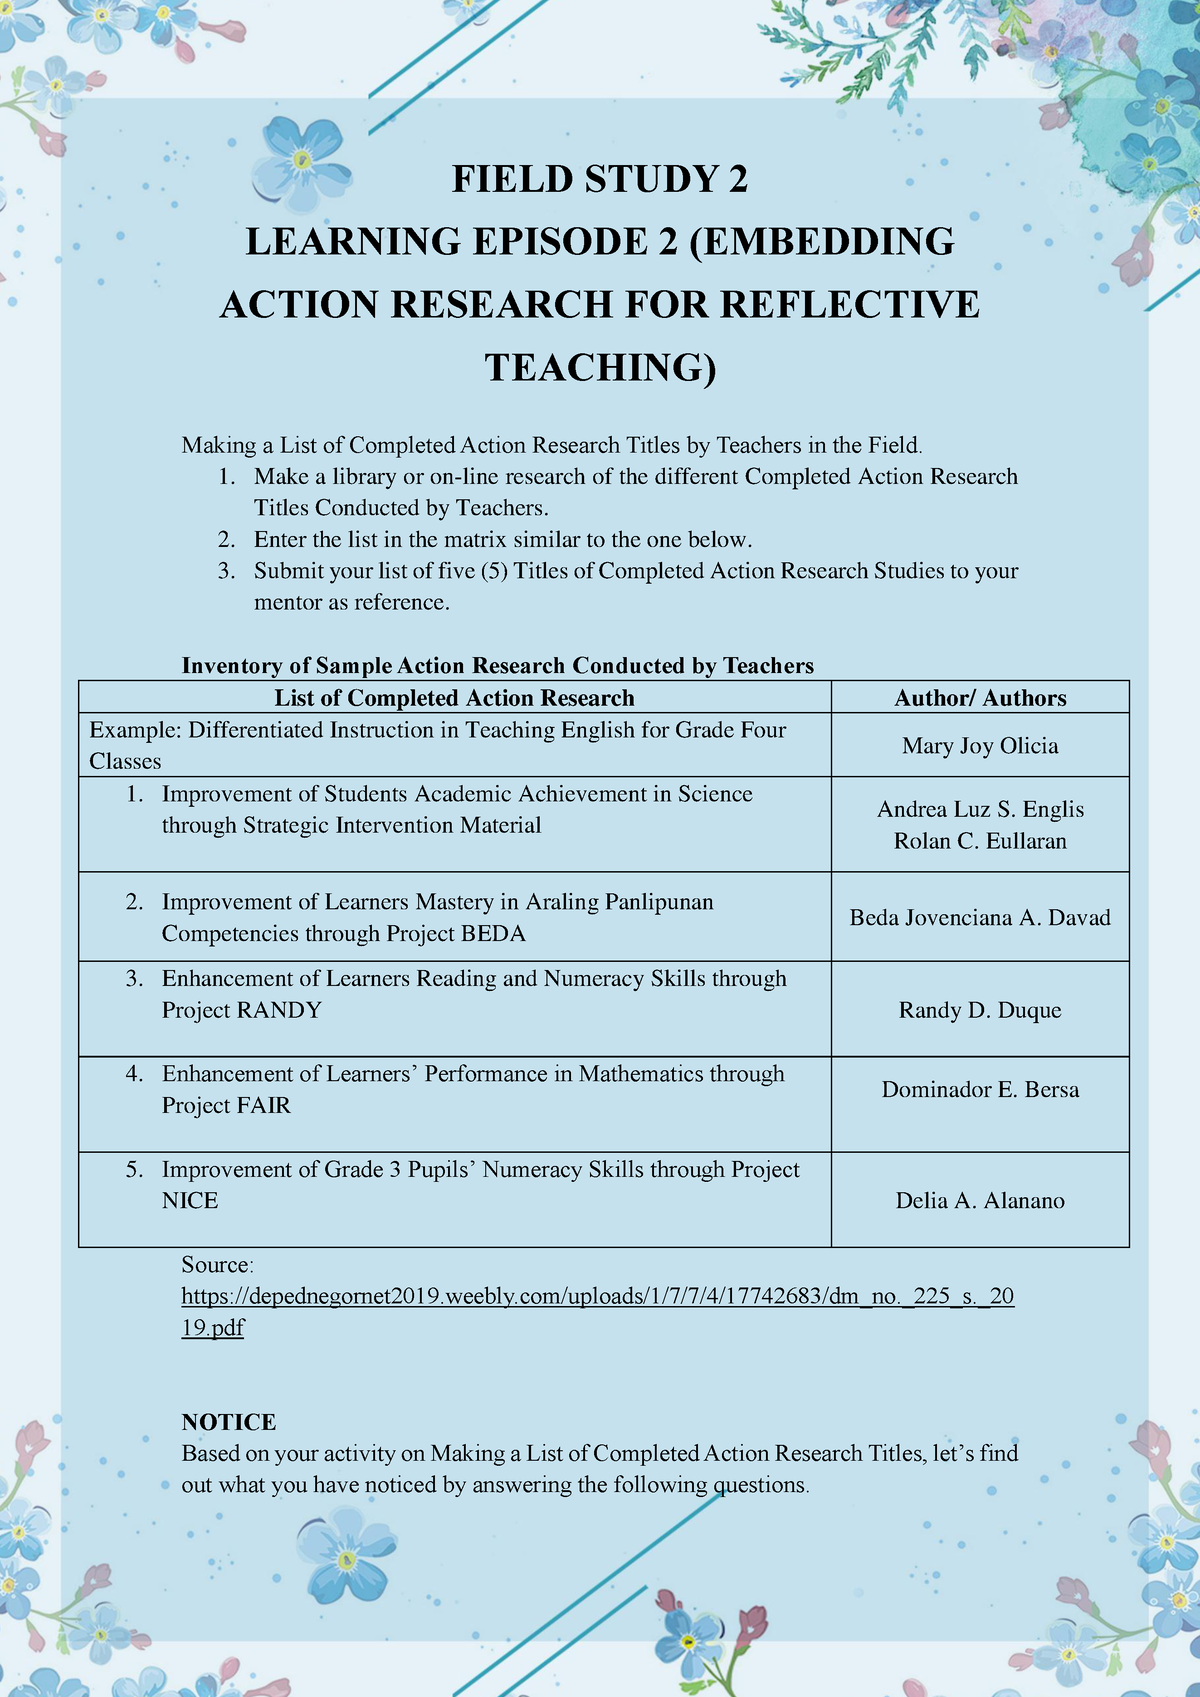 action research plan in field study 2